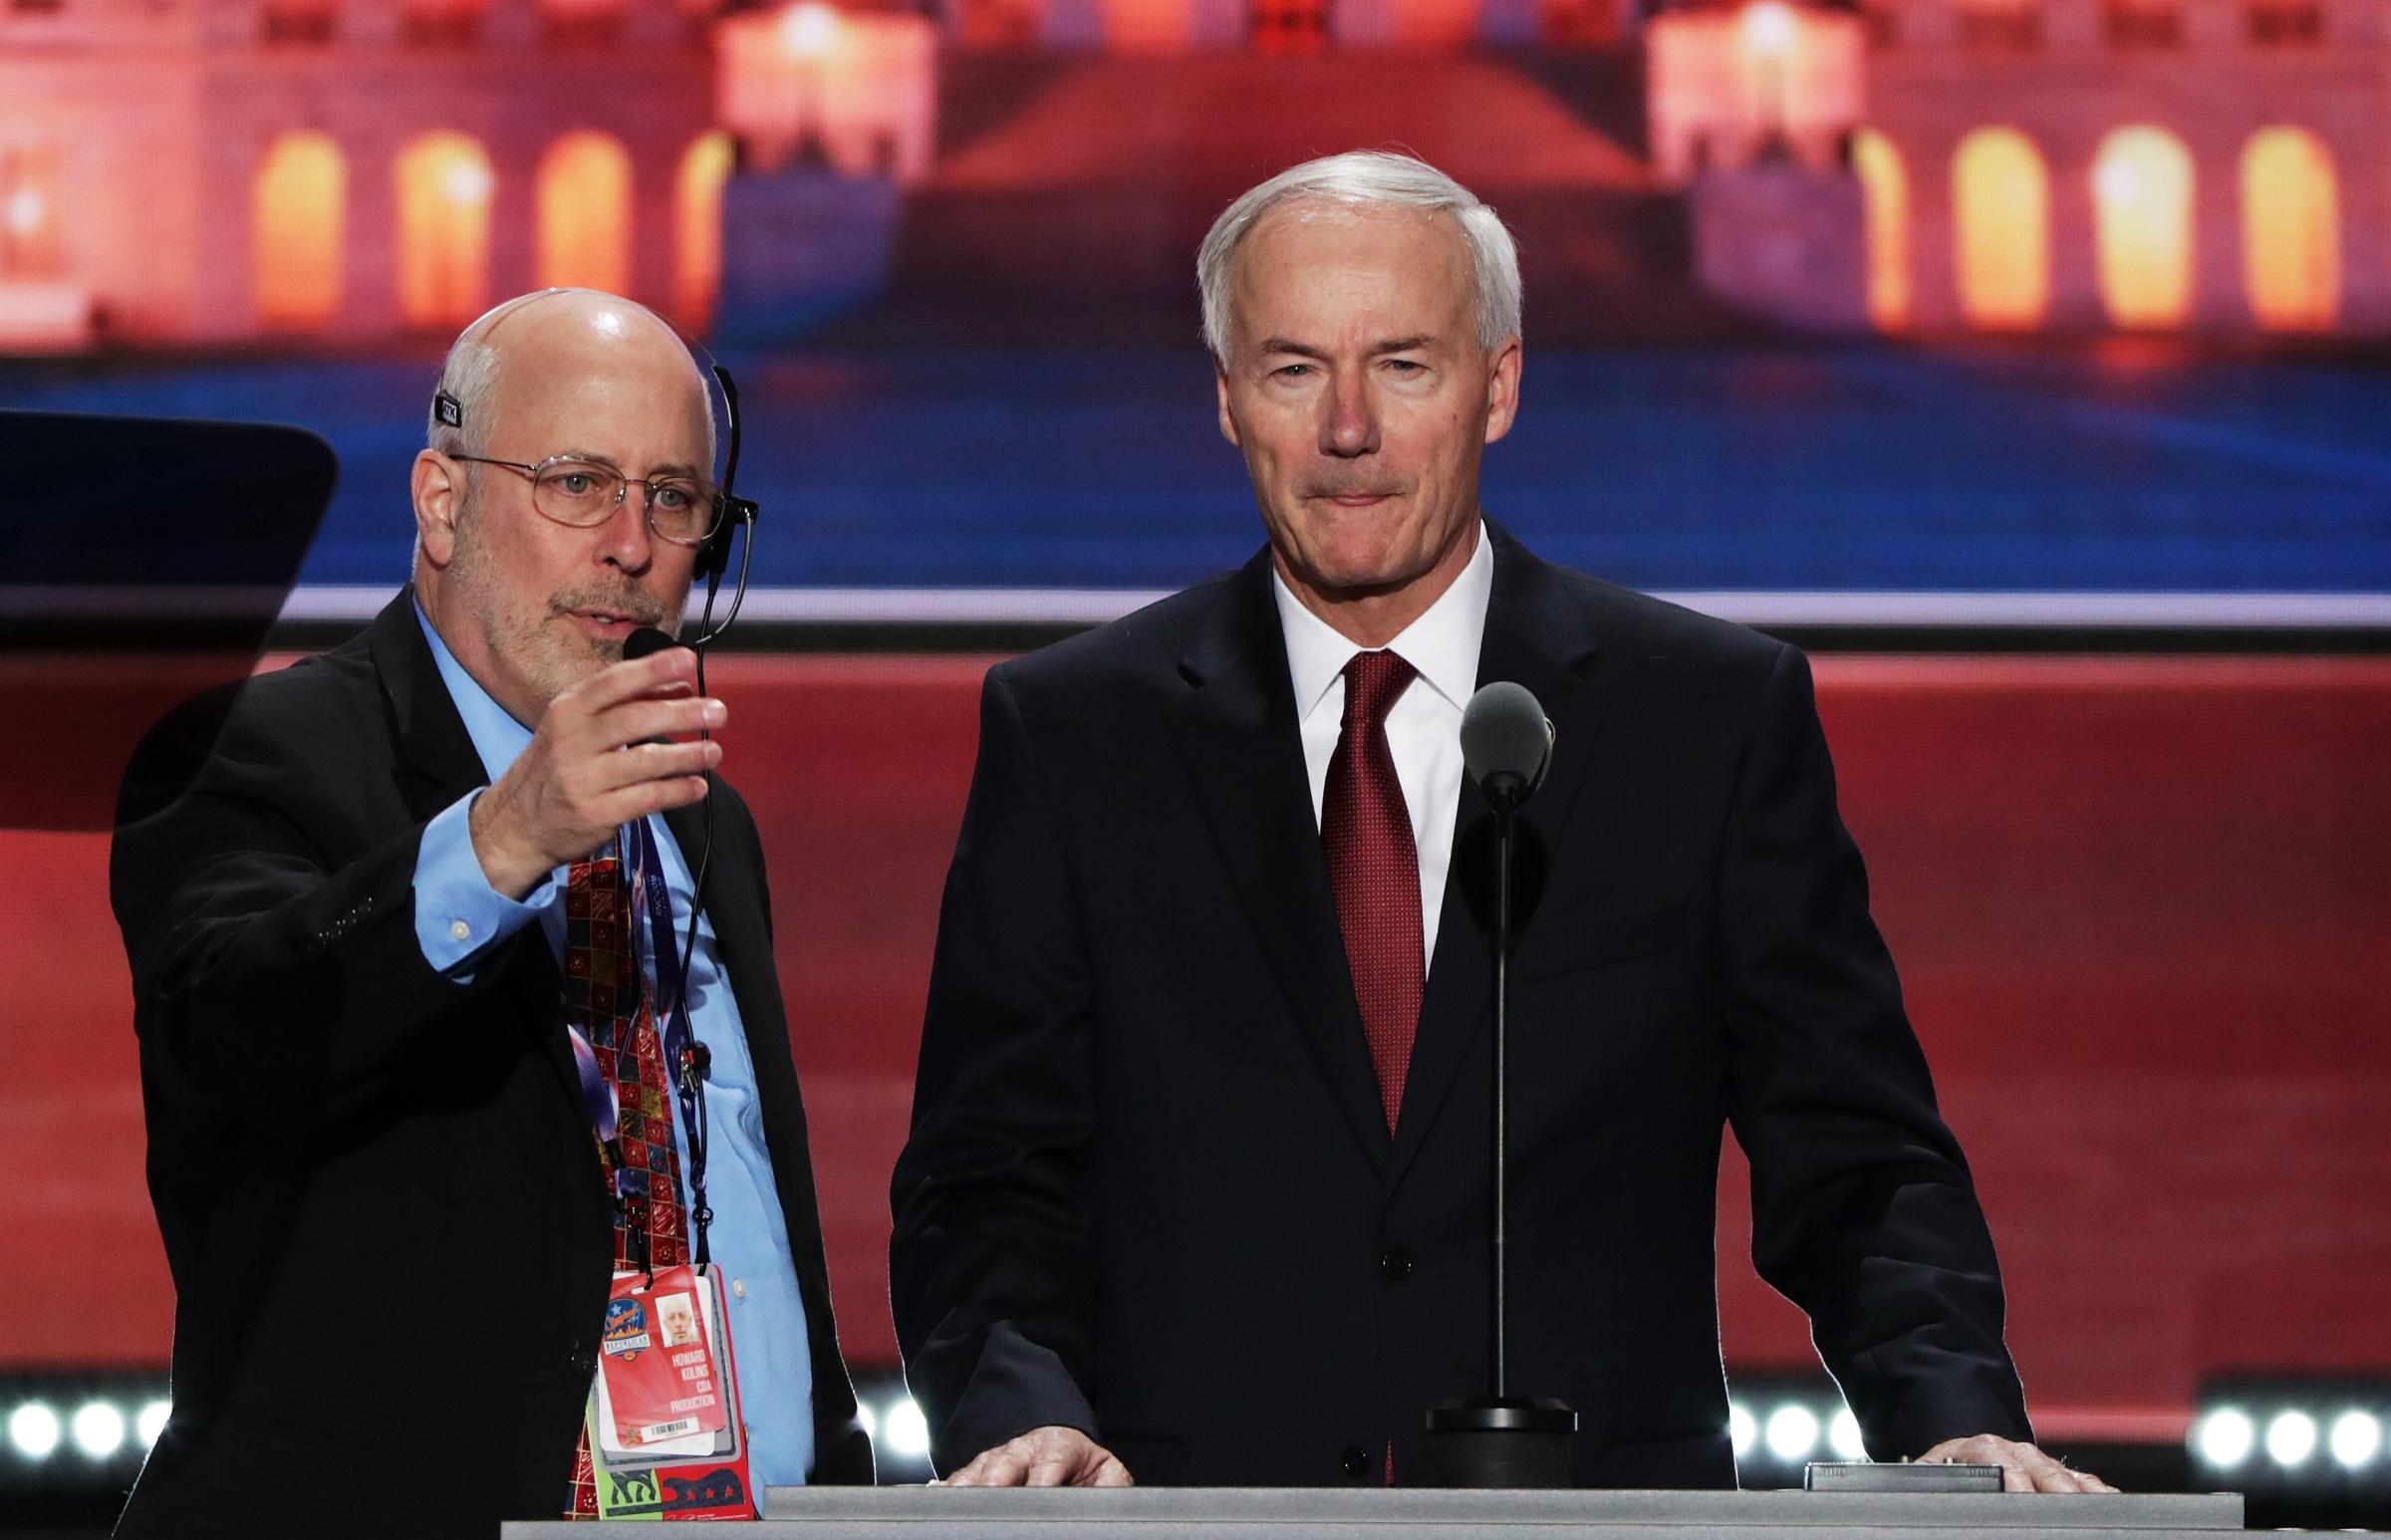 Arkansas Governor Asa Hutchinson stands on stage prior to the start of the second day of the Republican National Convention on July 19, 2016 at the Quicken Loans Arena in Cleveland.